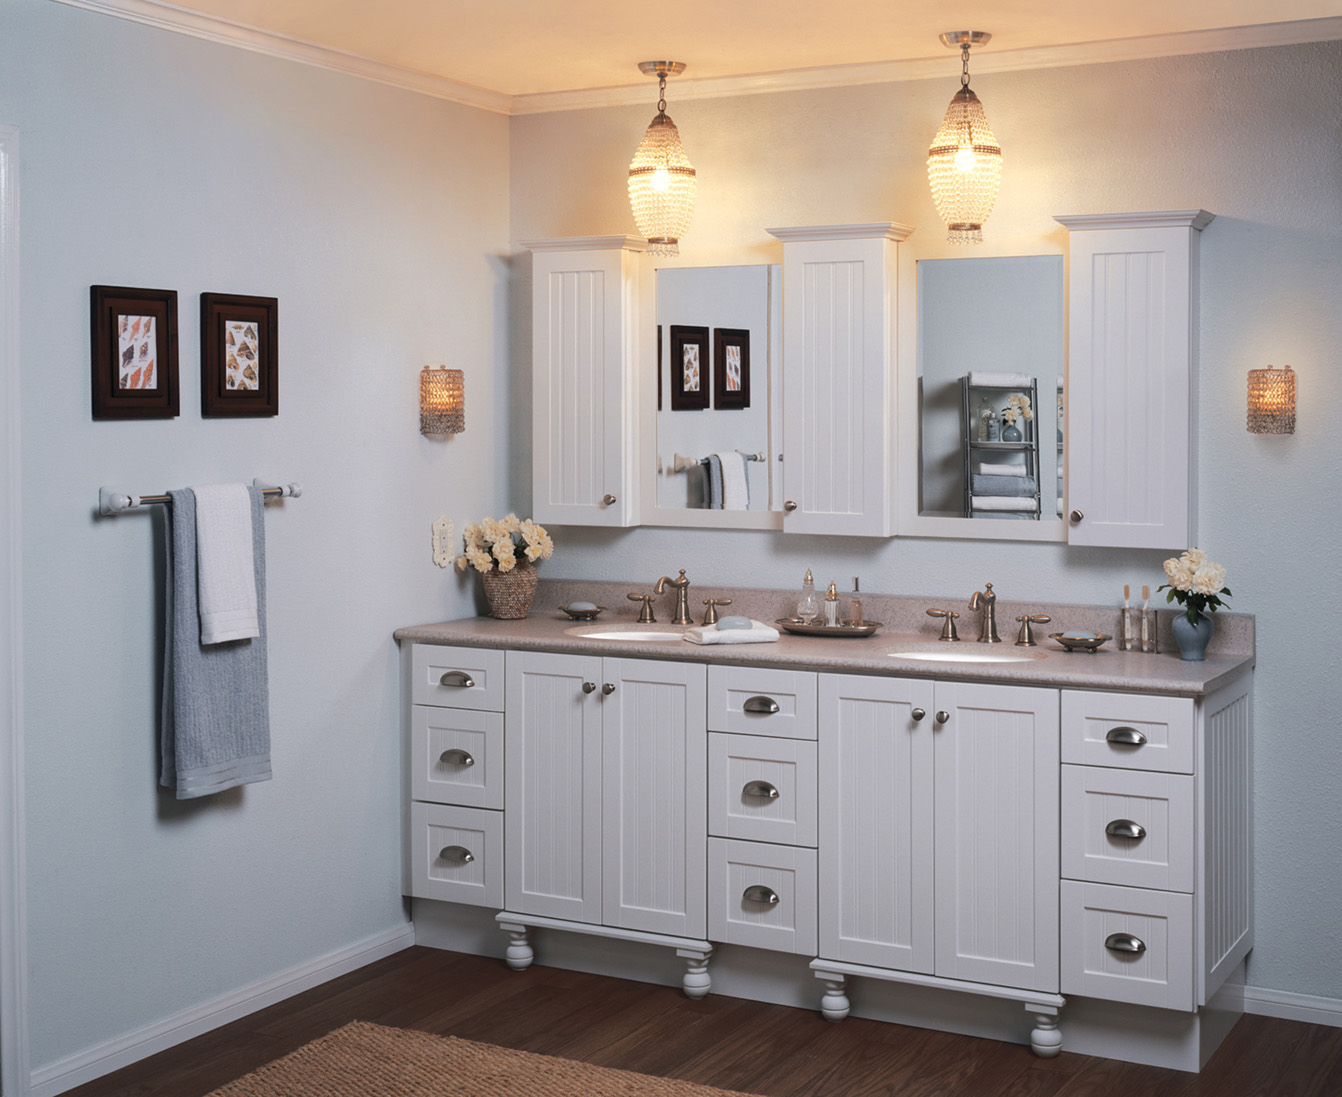 Bathroom With Wall Inspiring Bathroom With White Accent Wall Room Ideas Completed With Double Vanity Sink Coupled By Two Mirrors And Bathroom Wall Cabinets Bathroom The Best Choice For Bathroom: Bathroom Wall Cabinets